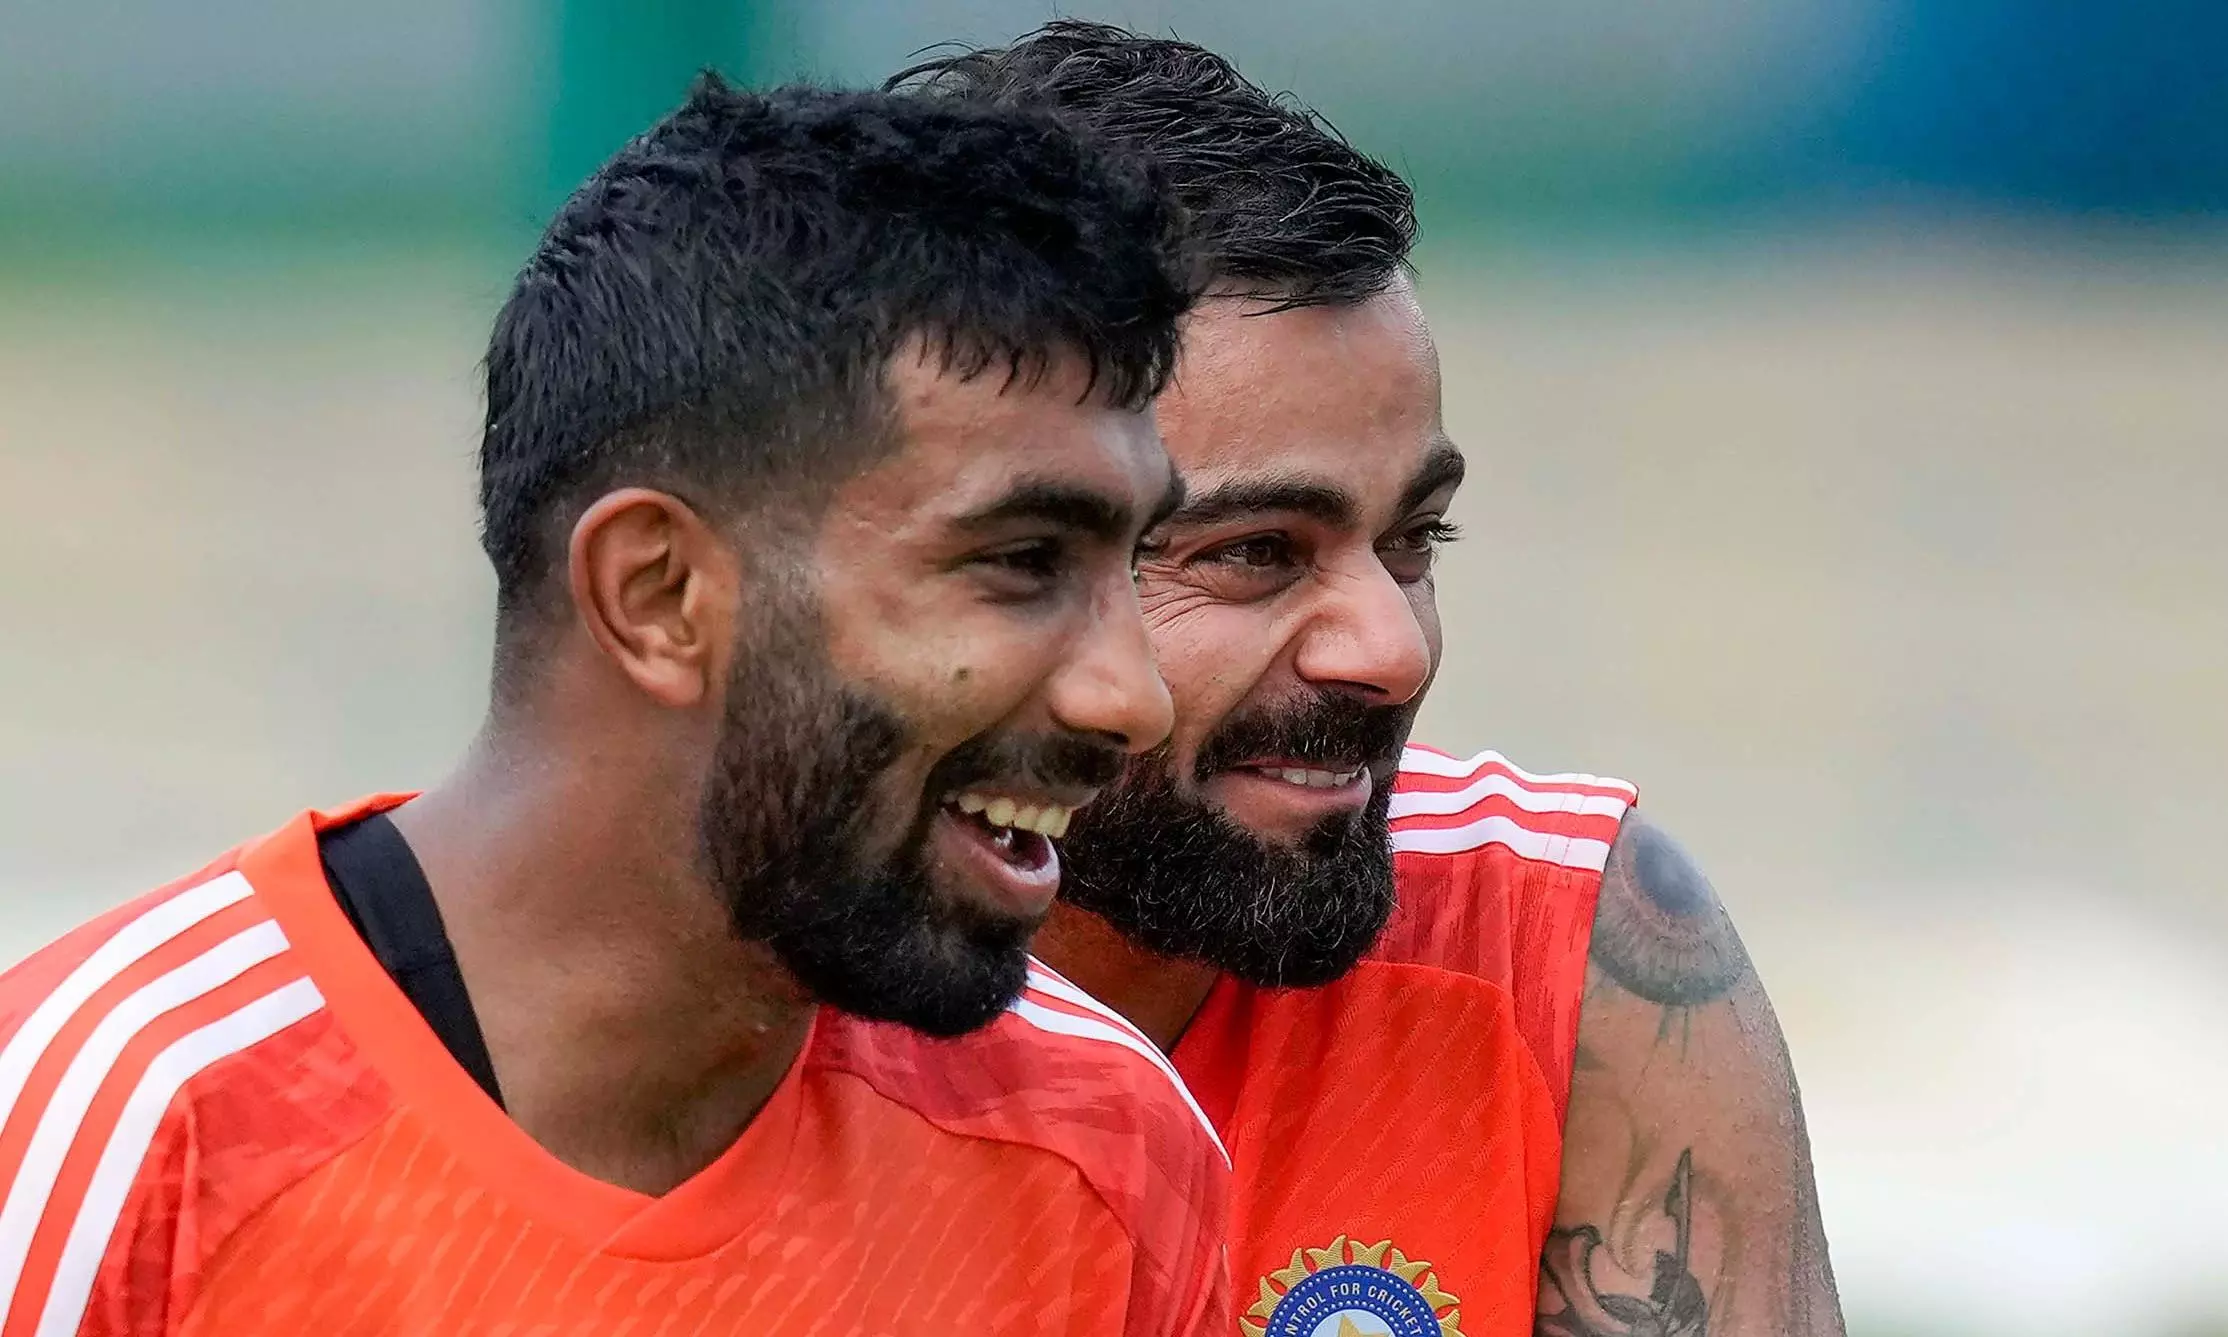 Bumrah was desperate to play Test cricket with Kohli, says Shastri